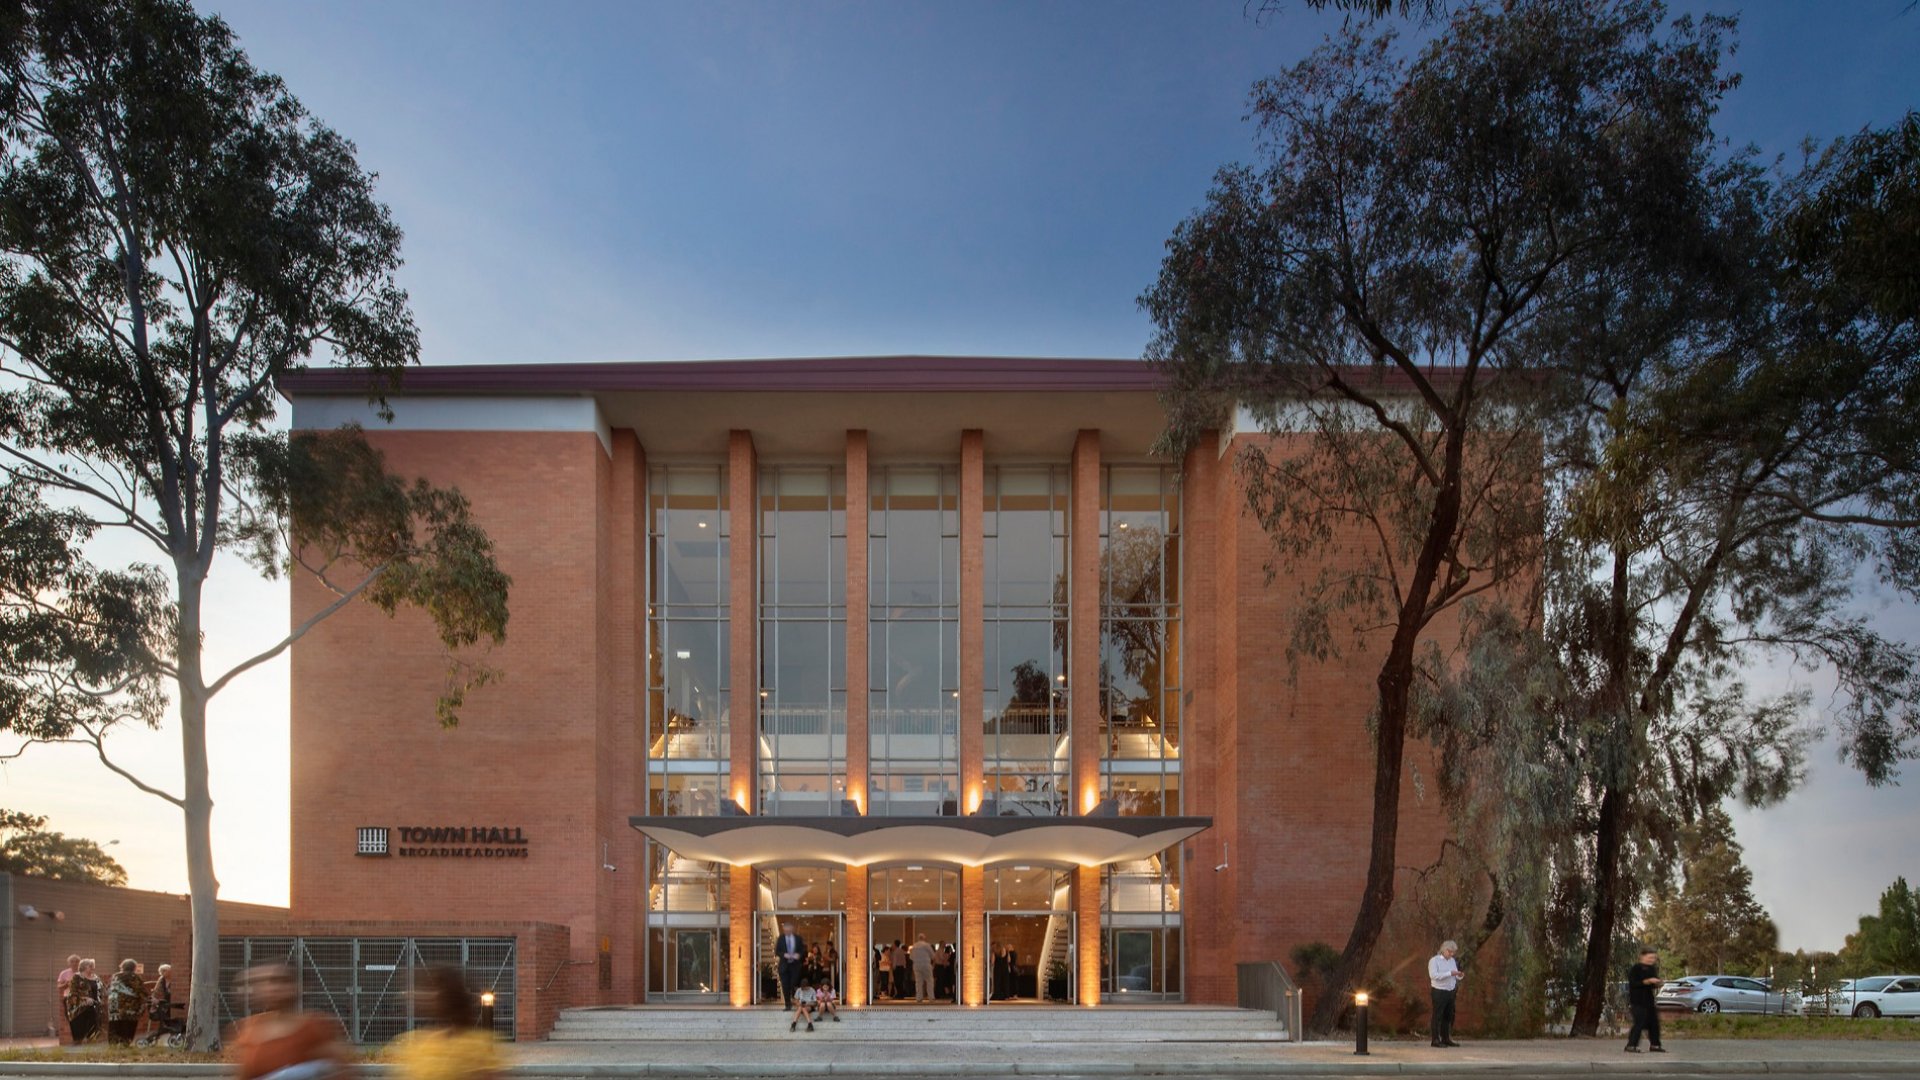 The project was awarded the Australia Institute of Architects (Victorian Chapter) Victorian Architecture Medal, George Knight Award for Heritage Architecture and Public Architecture Commendation (2020).